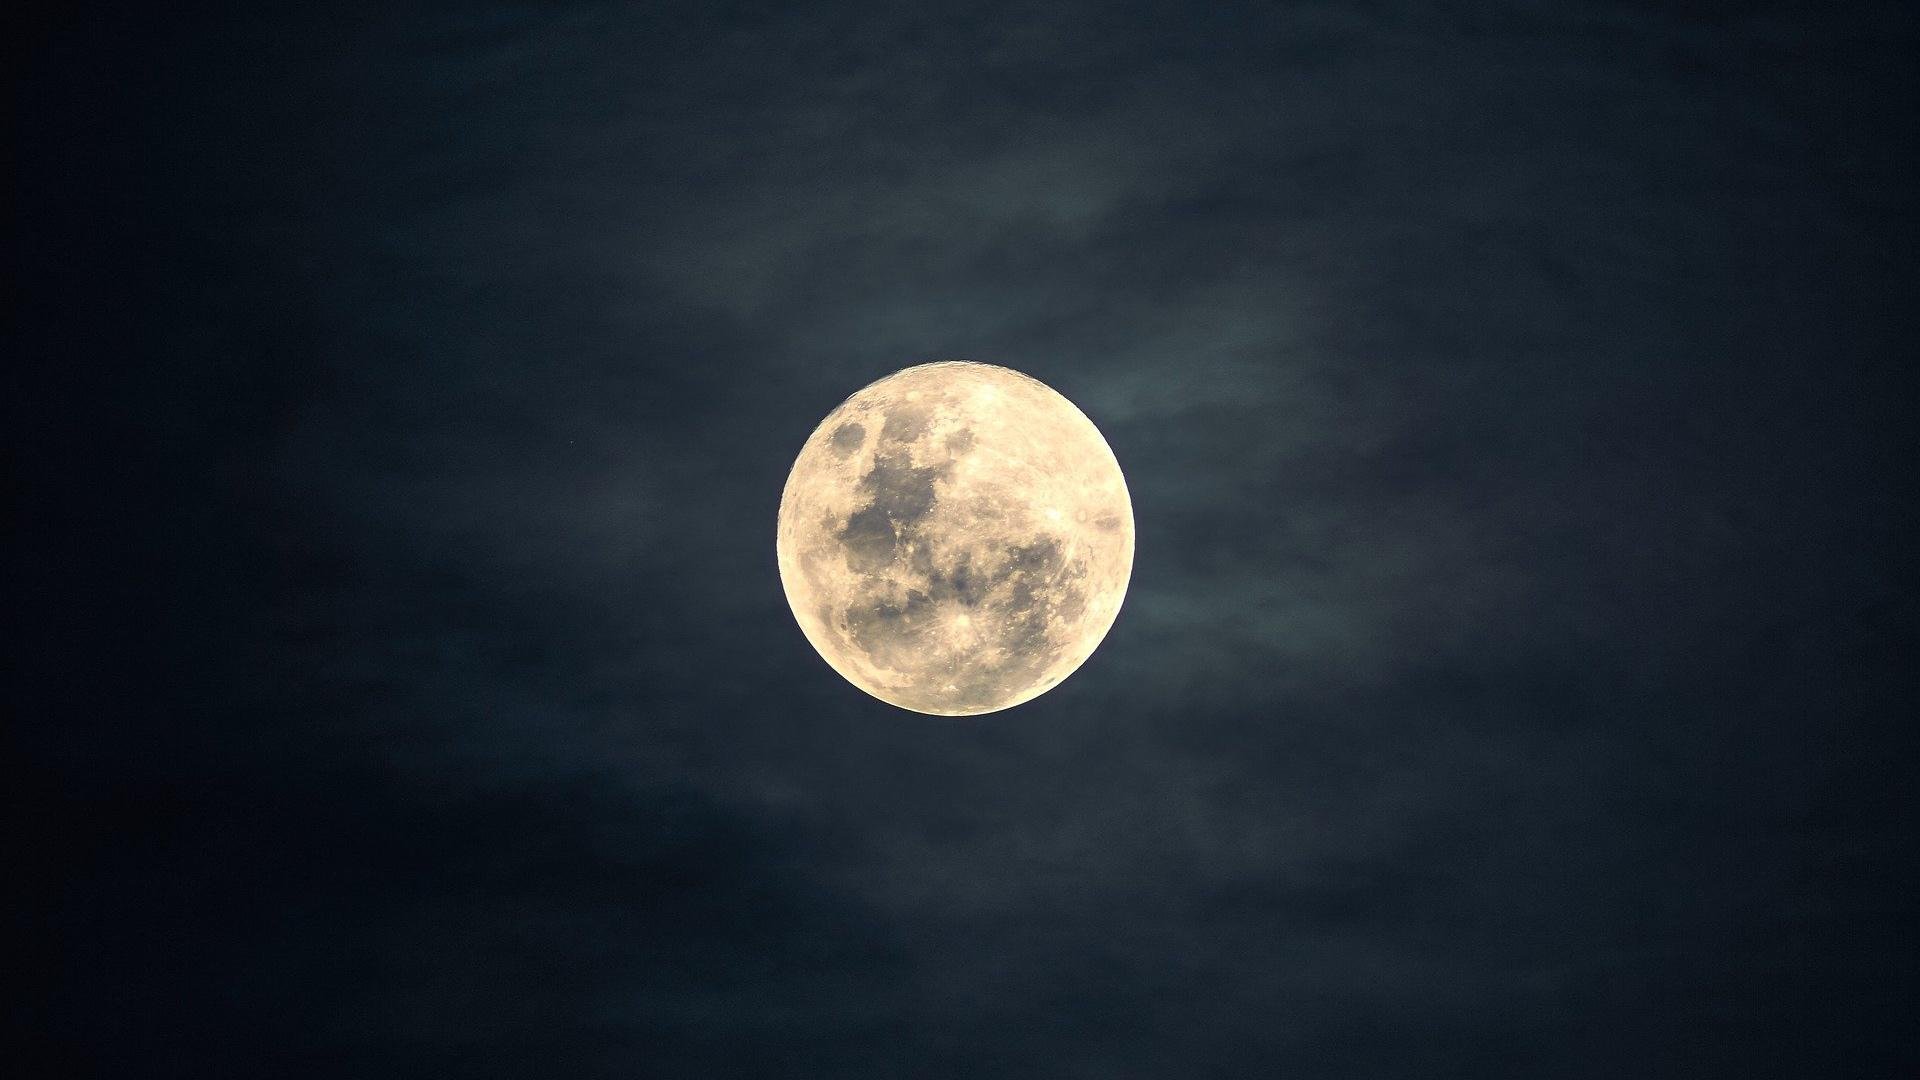 We're going to see a rare Halloween blue moon tomorrow